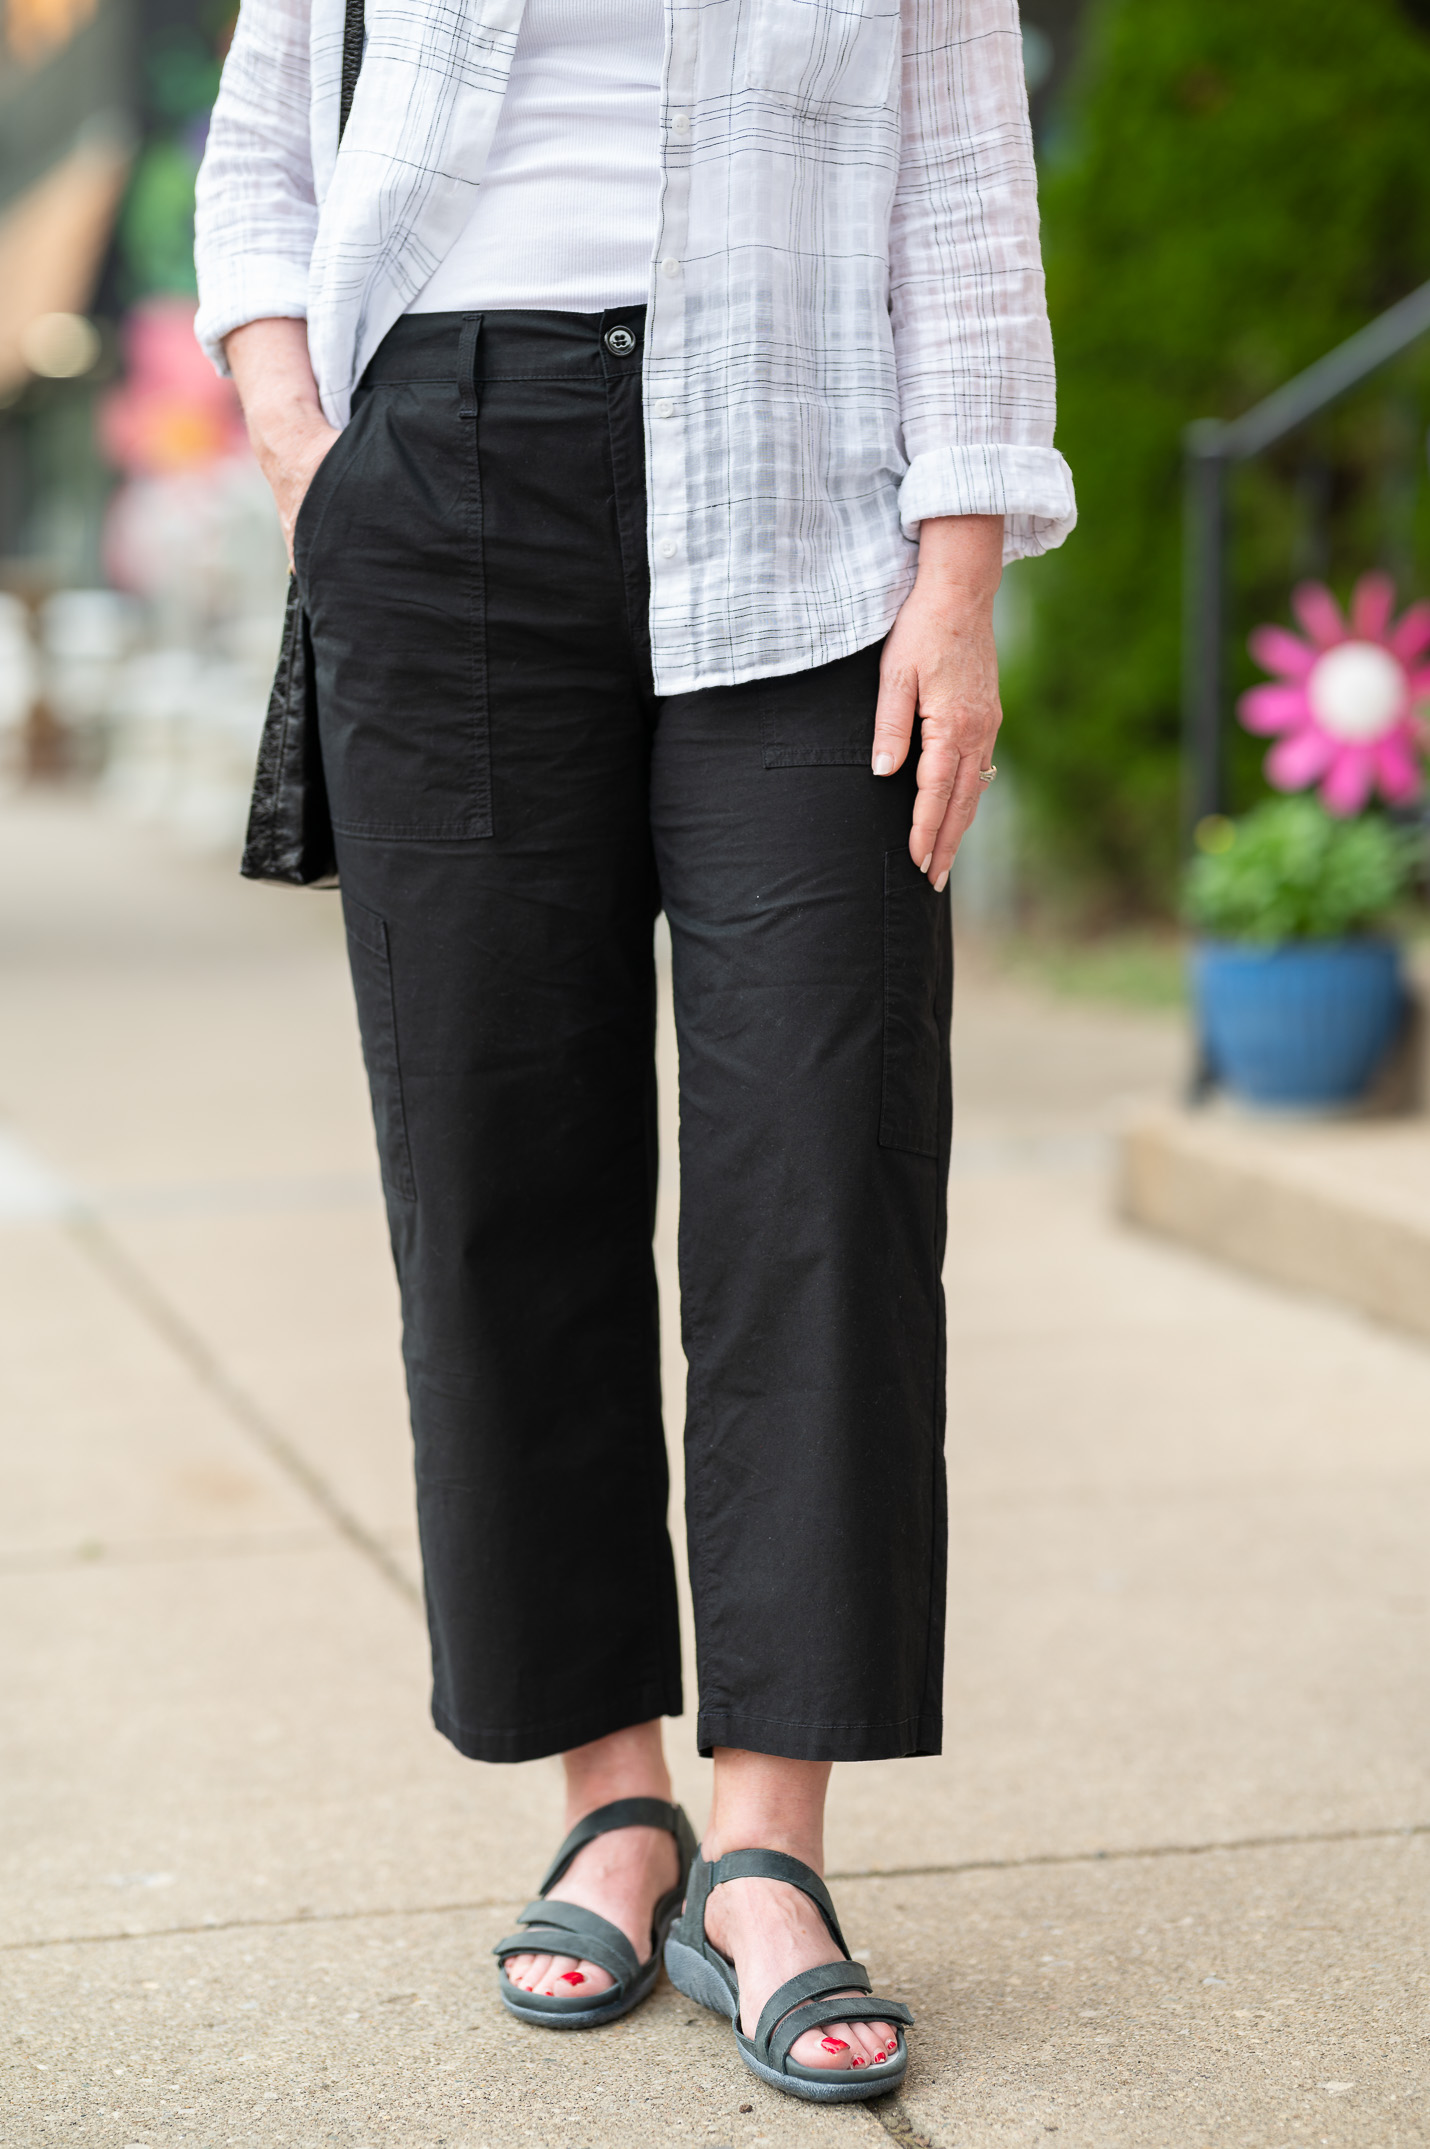 Cropped Utility Pants Outfit